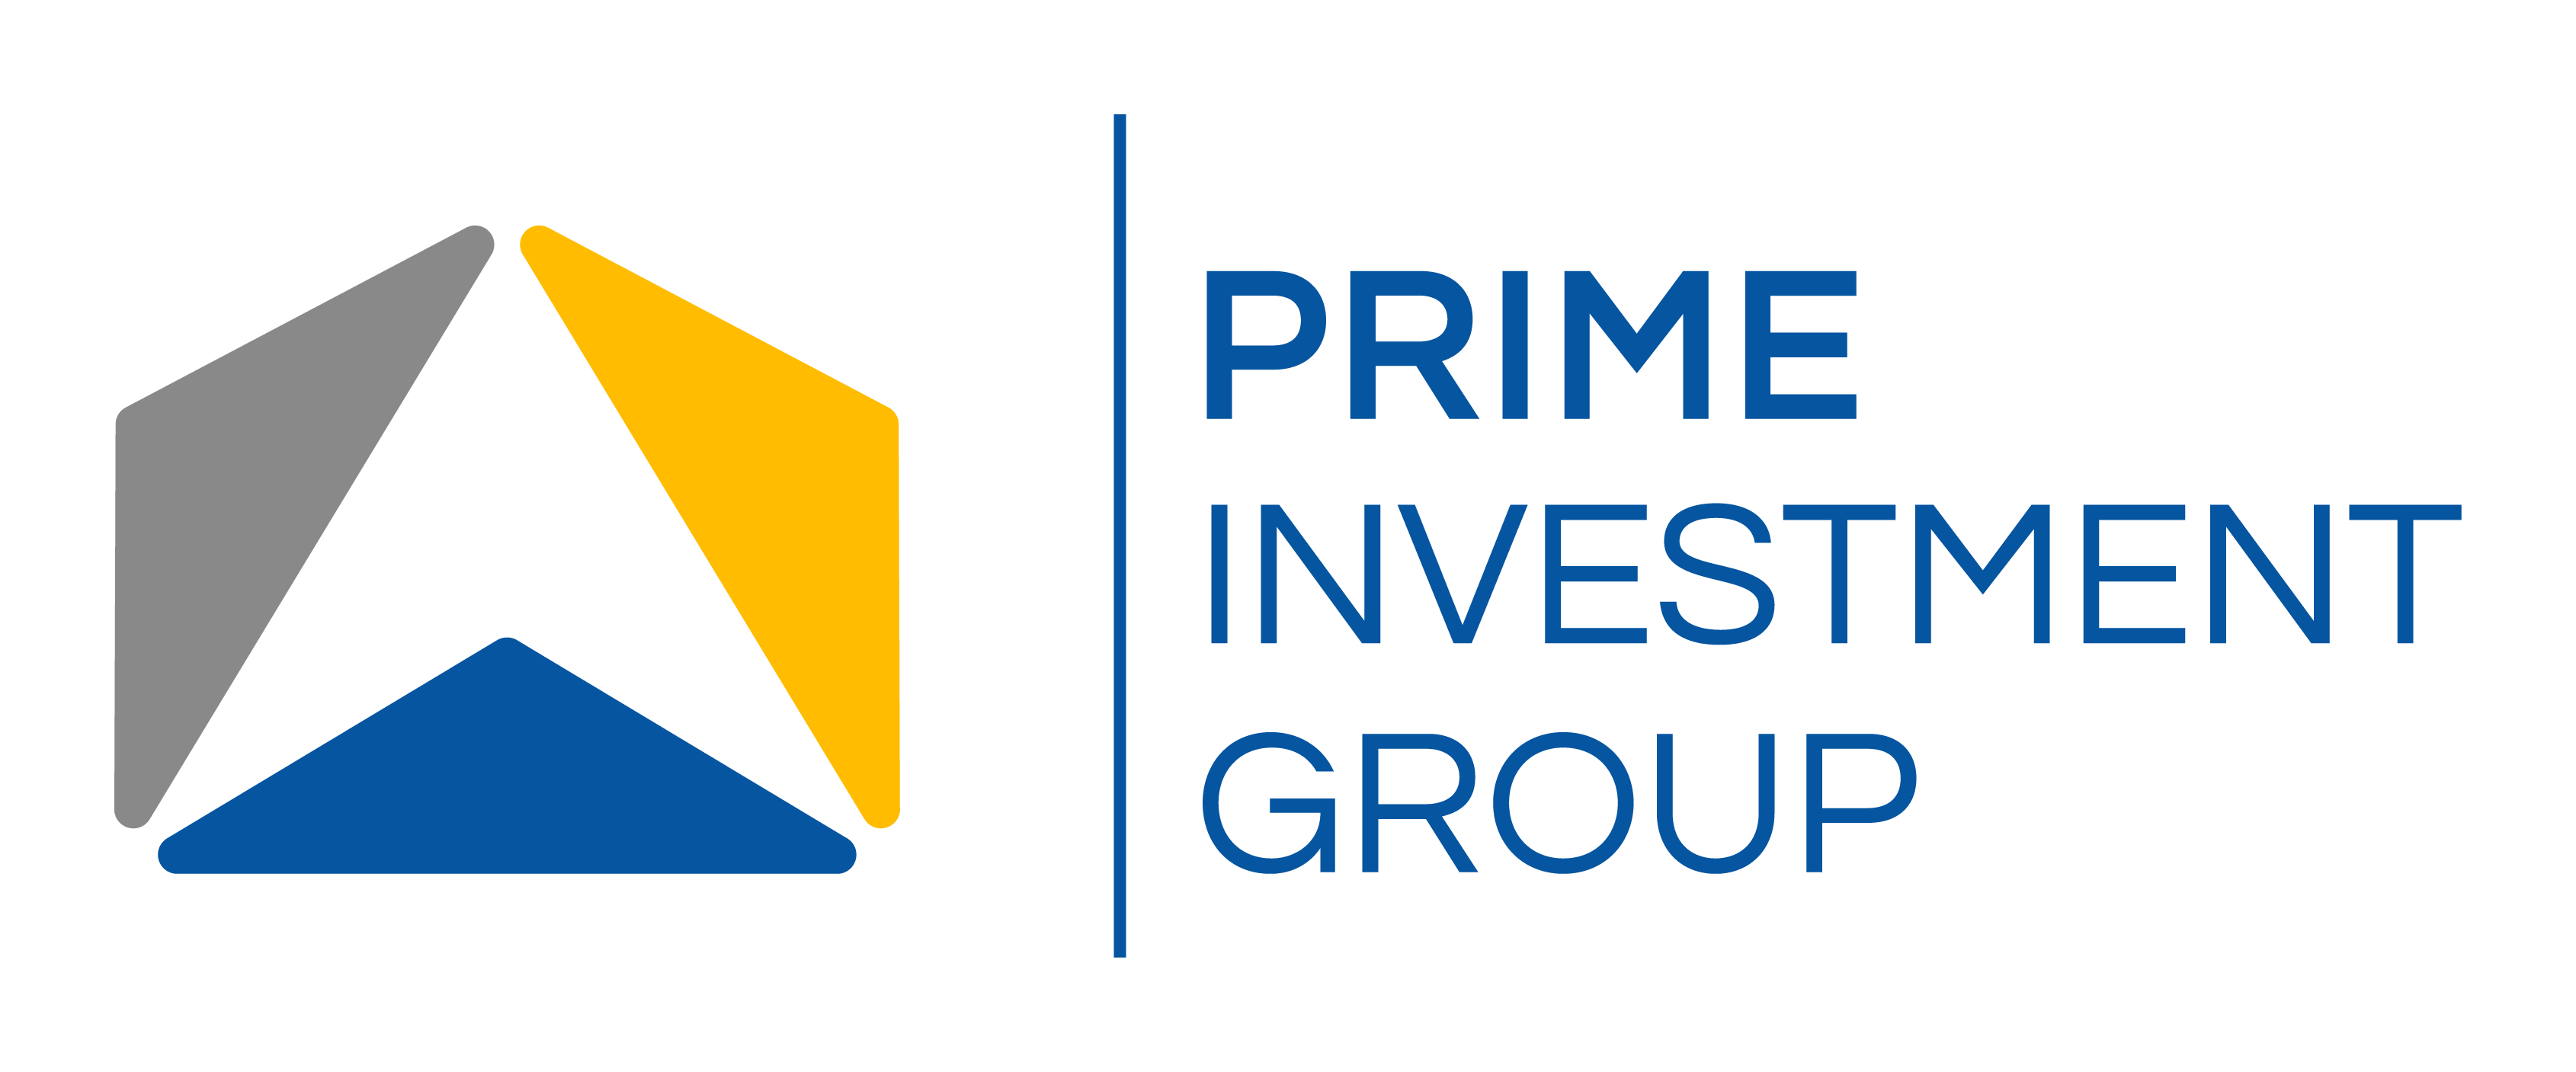 Prime Investment Group